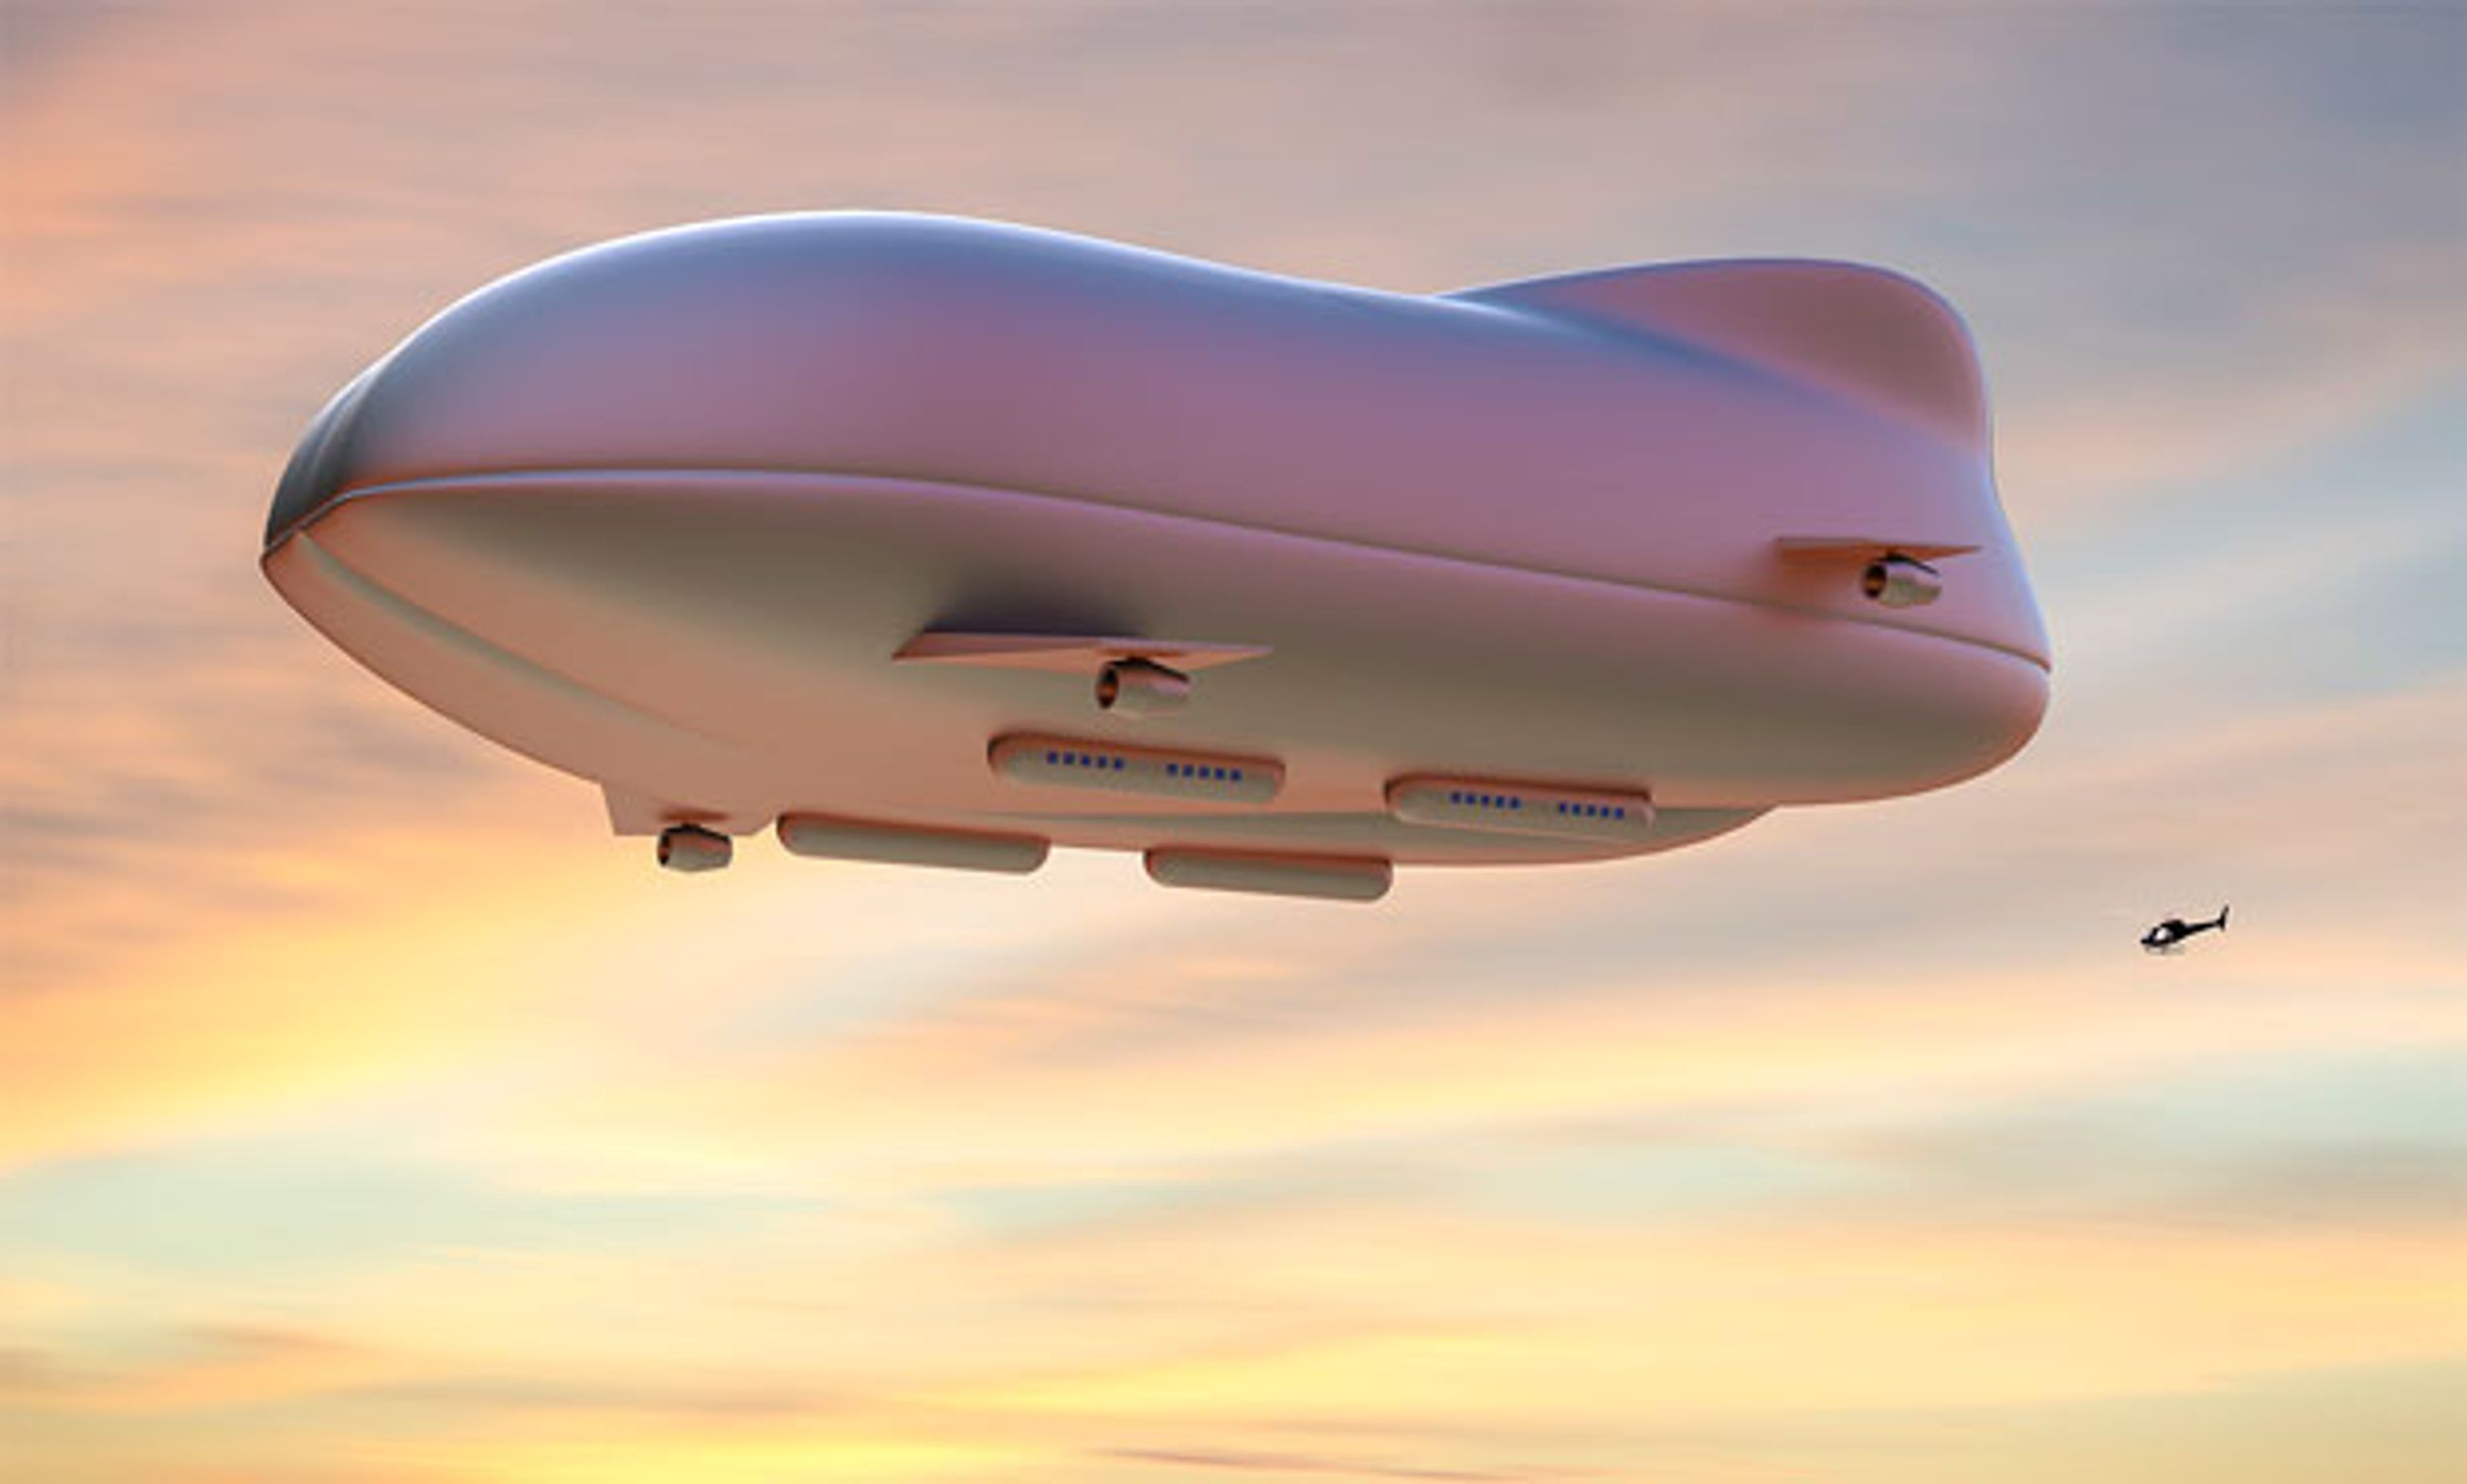 3-D rendering of an airship on a sunset sky.